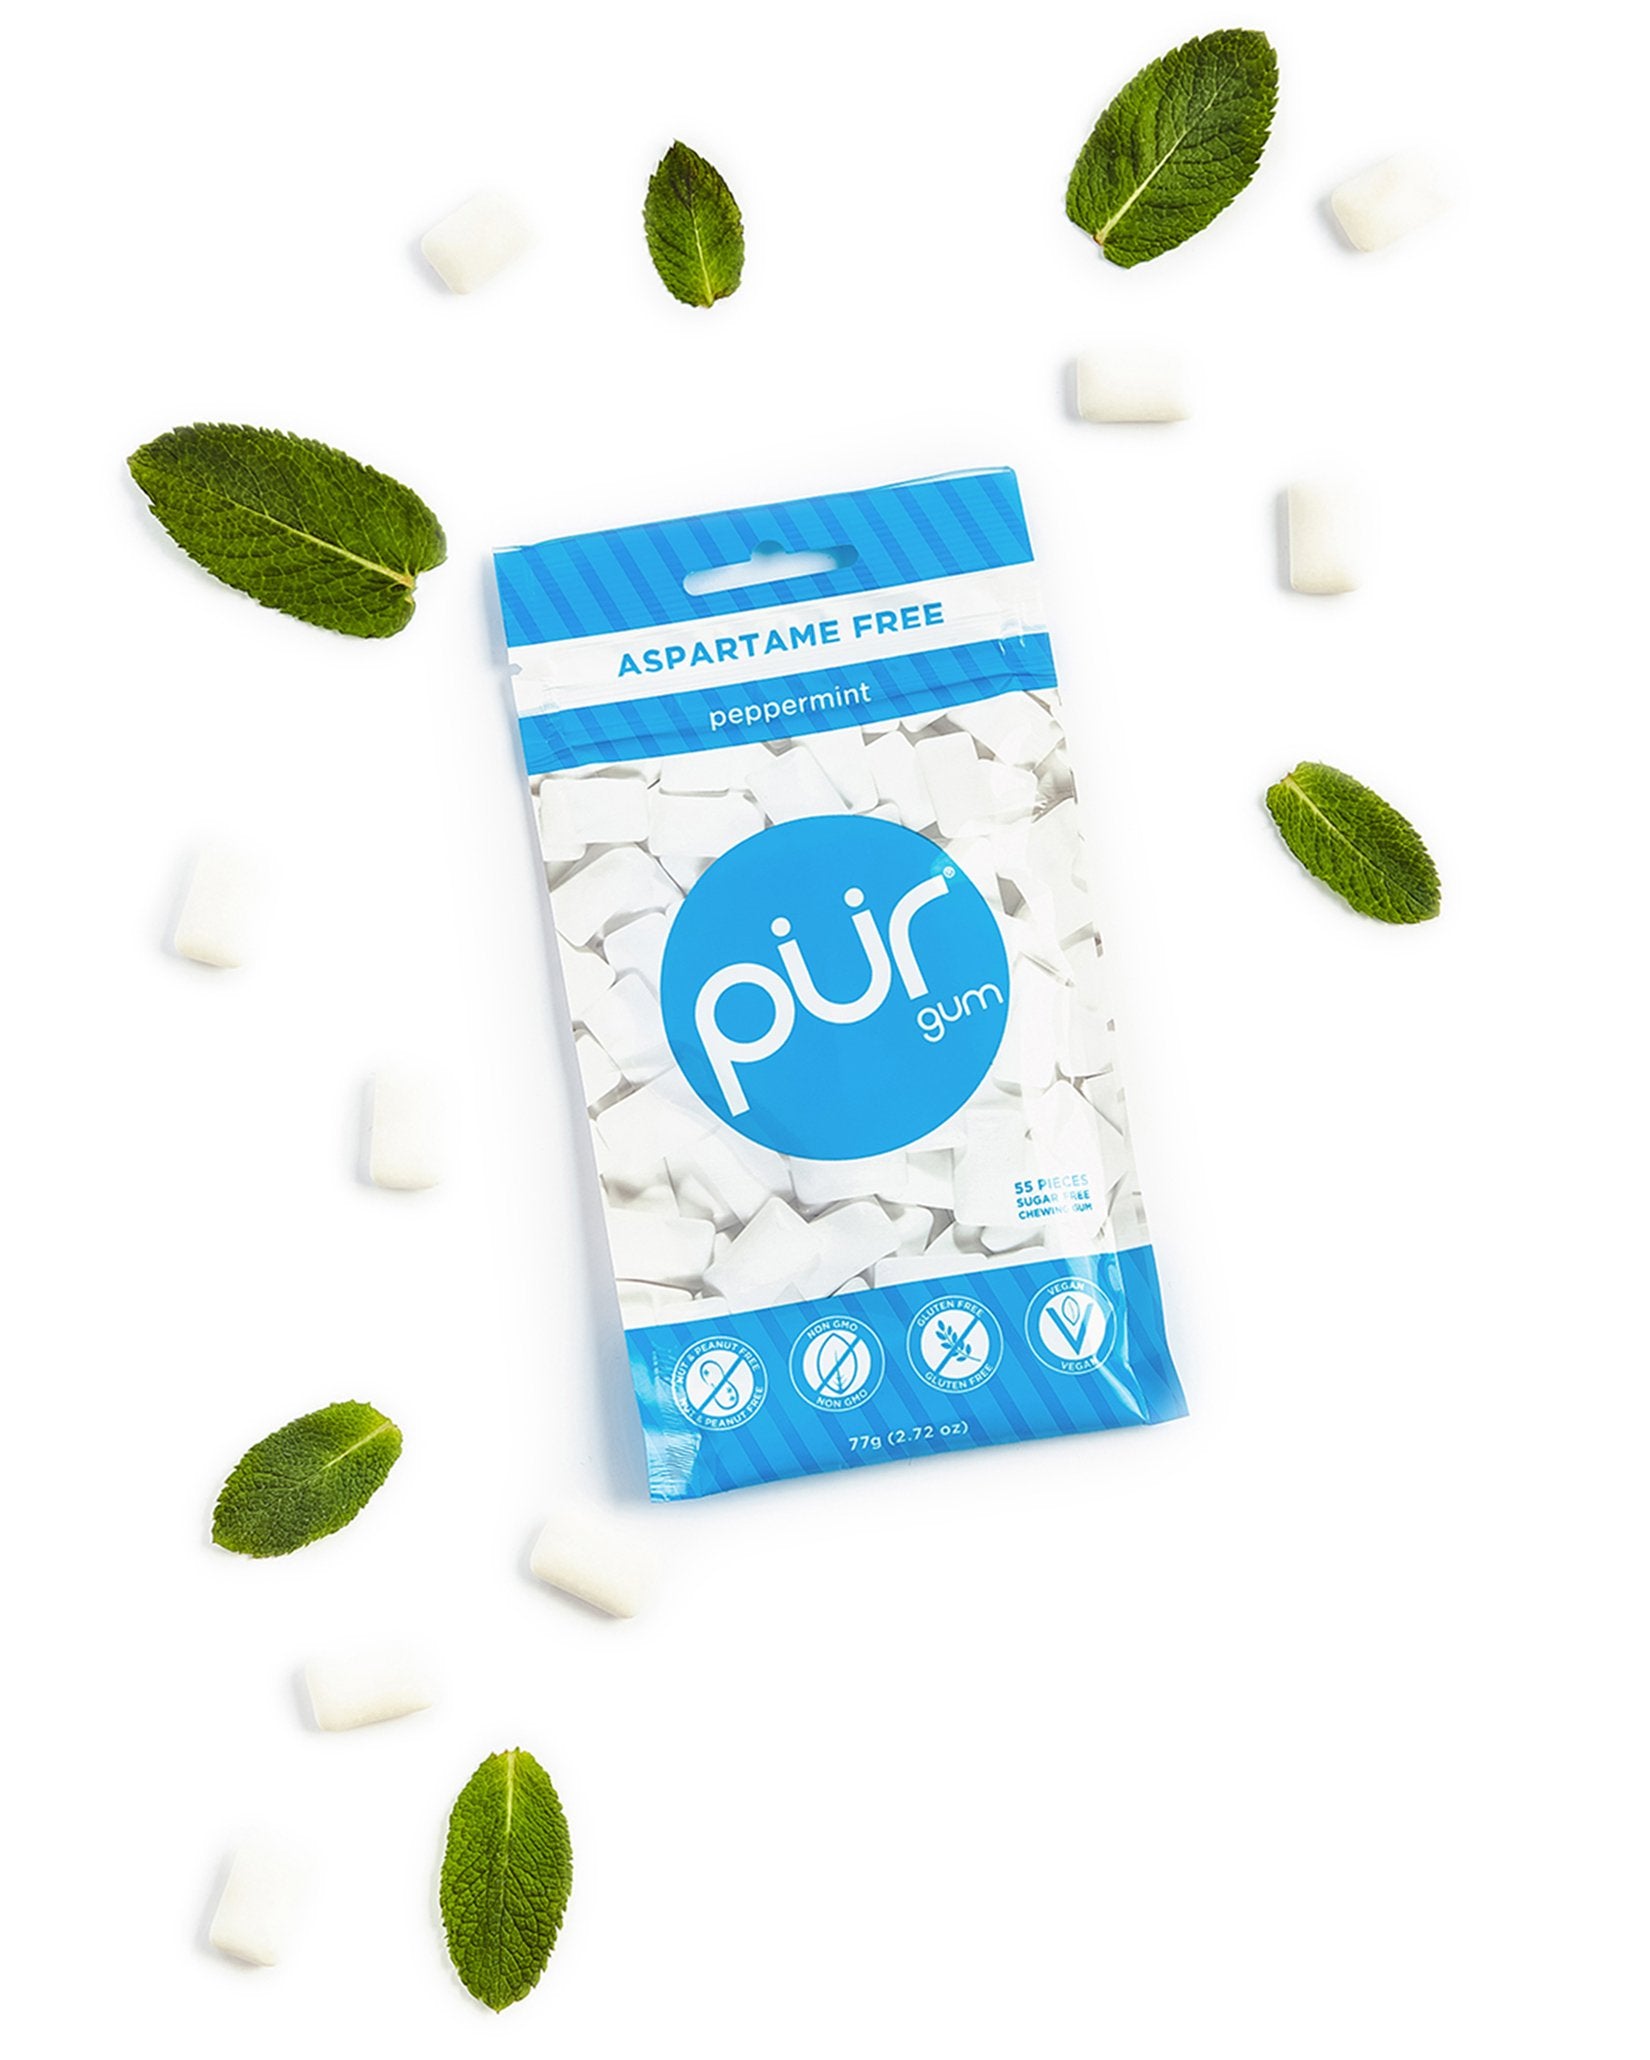 Gum, Pur, made with Xylitol